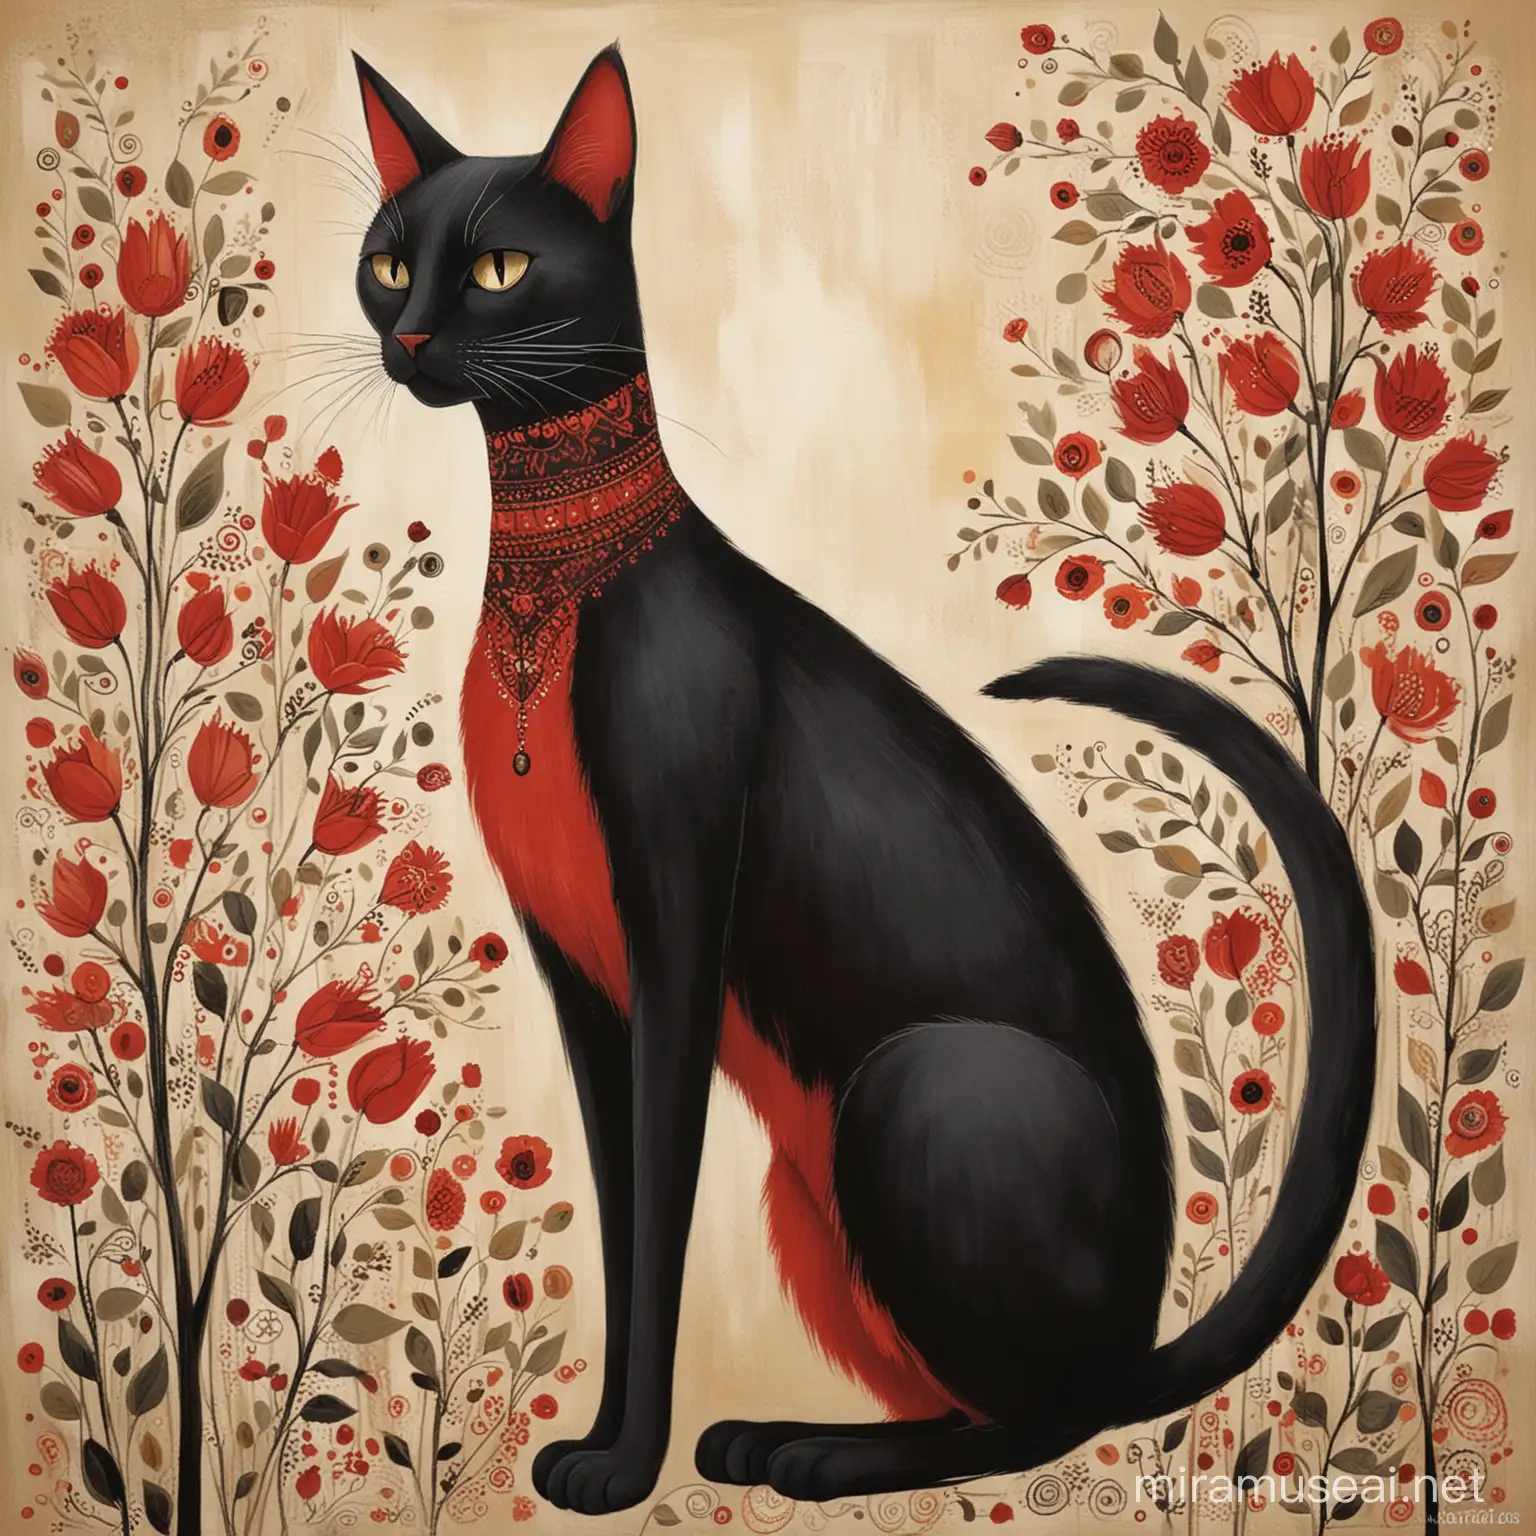 A black and red cat with a very long neck,  pale colors, romantic, detailed, illustration. Folk Art abastract karla gerard